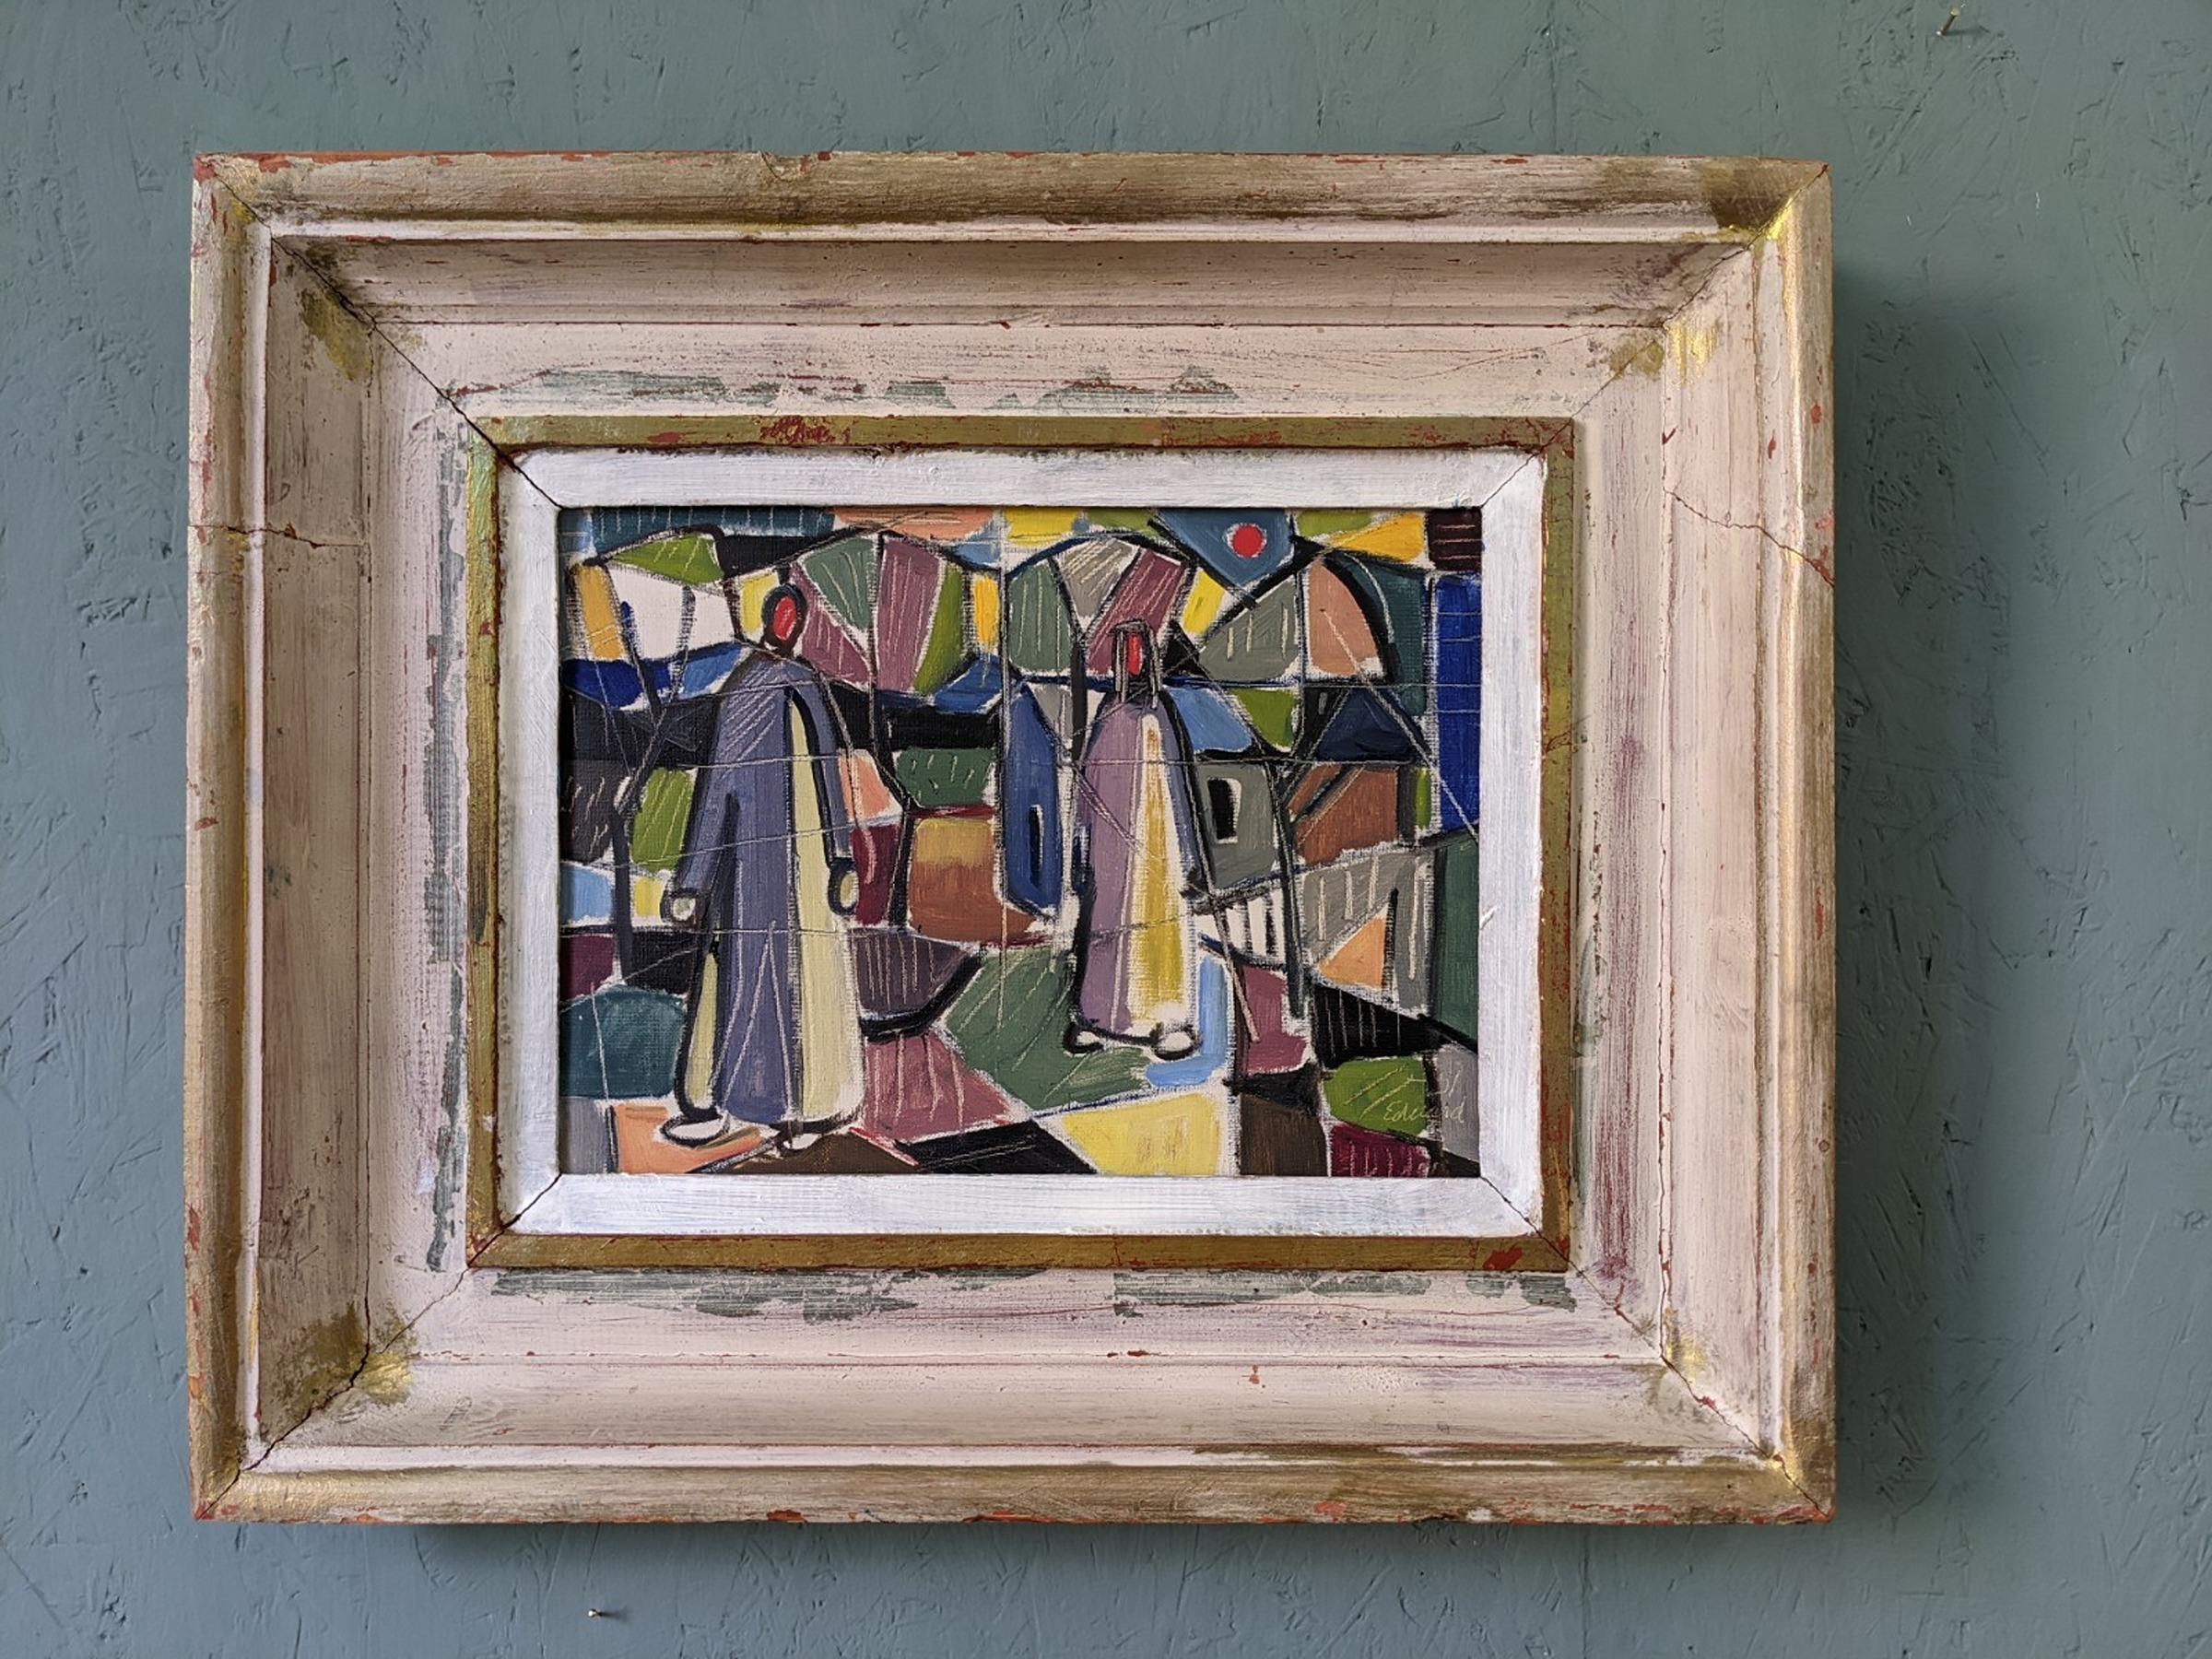 FIGURES IN COLOUR
Size: 42 x 51 cm (including frame)
Oil onto Canvas

A playful and striking composition presenting 2 figures in a coloured backdrop, brilliantly executed in oil onto canvas and dated 1951.

Painted with a modernist ethos and